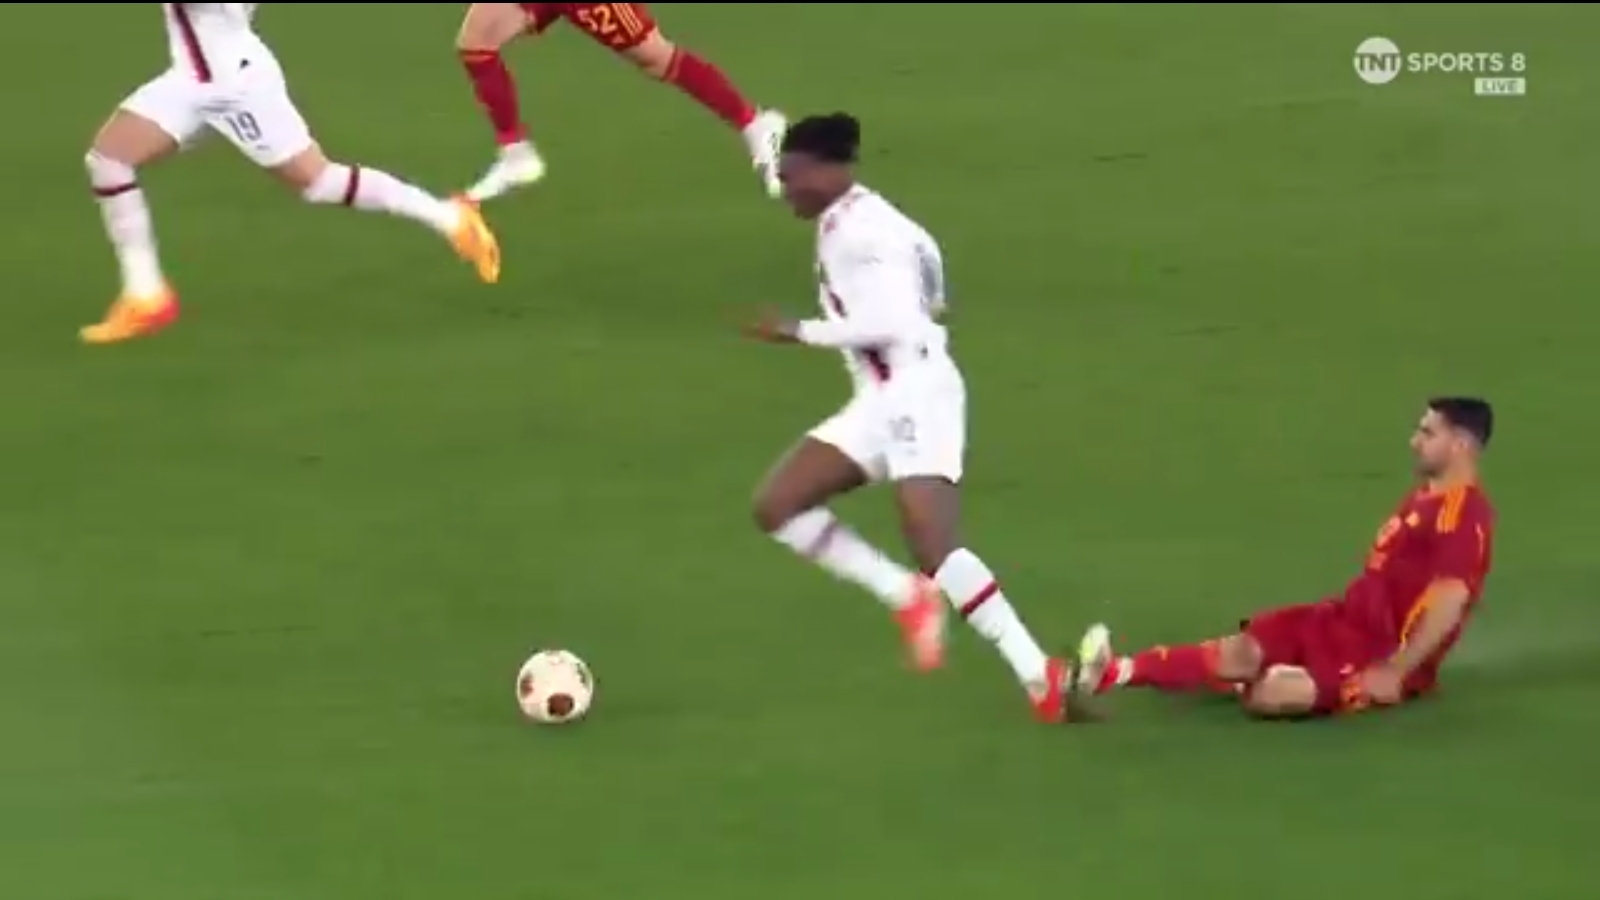 Watch as Roma player dismissed for this foul on Rafael Leao – Is this harsh?